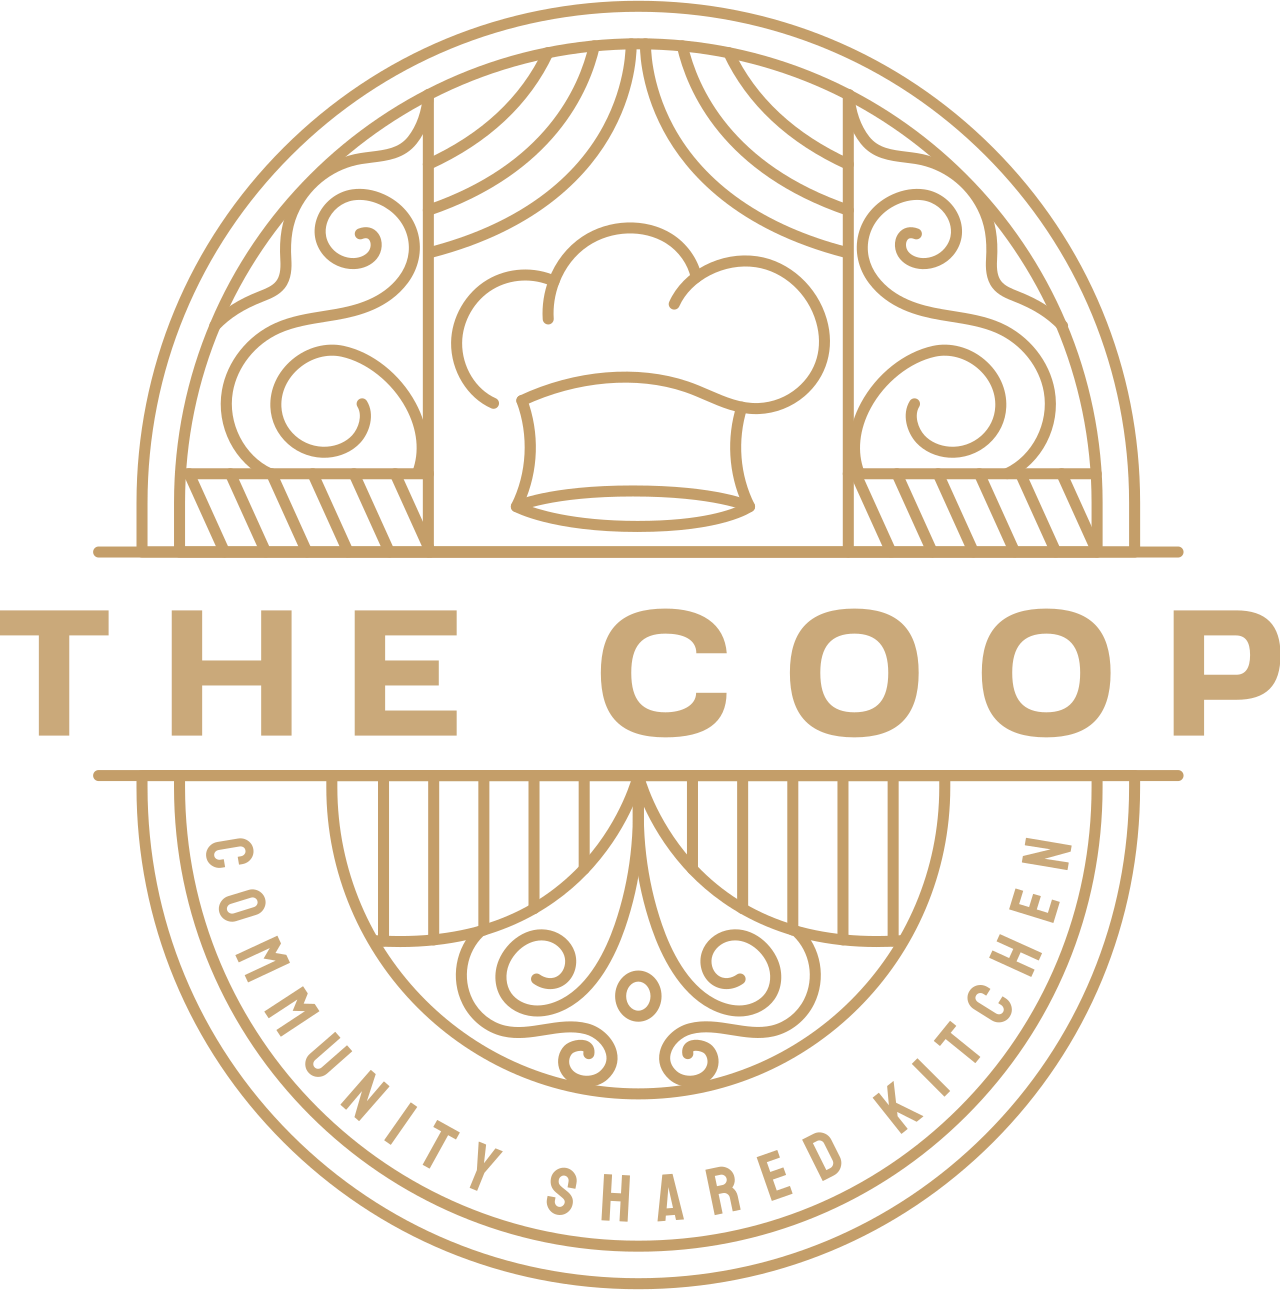 The Coop's logo